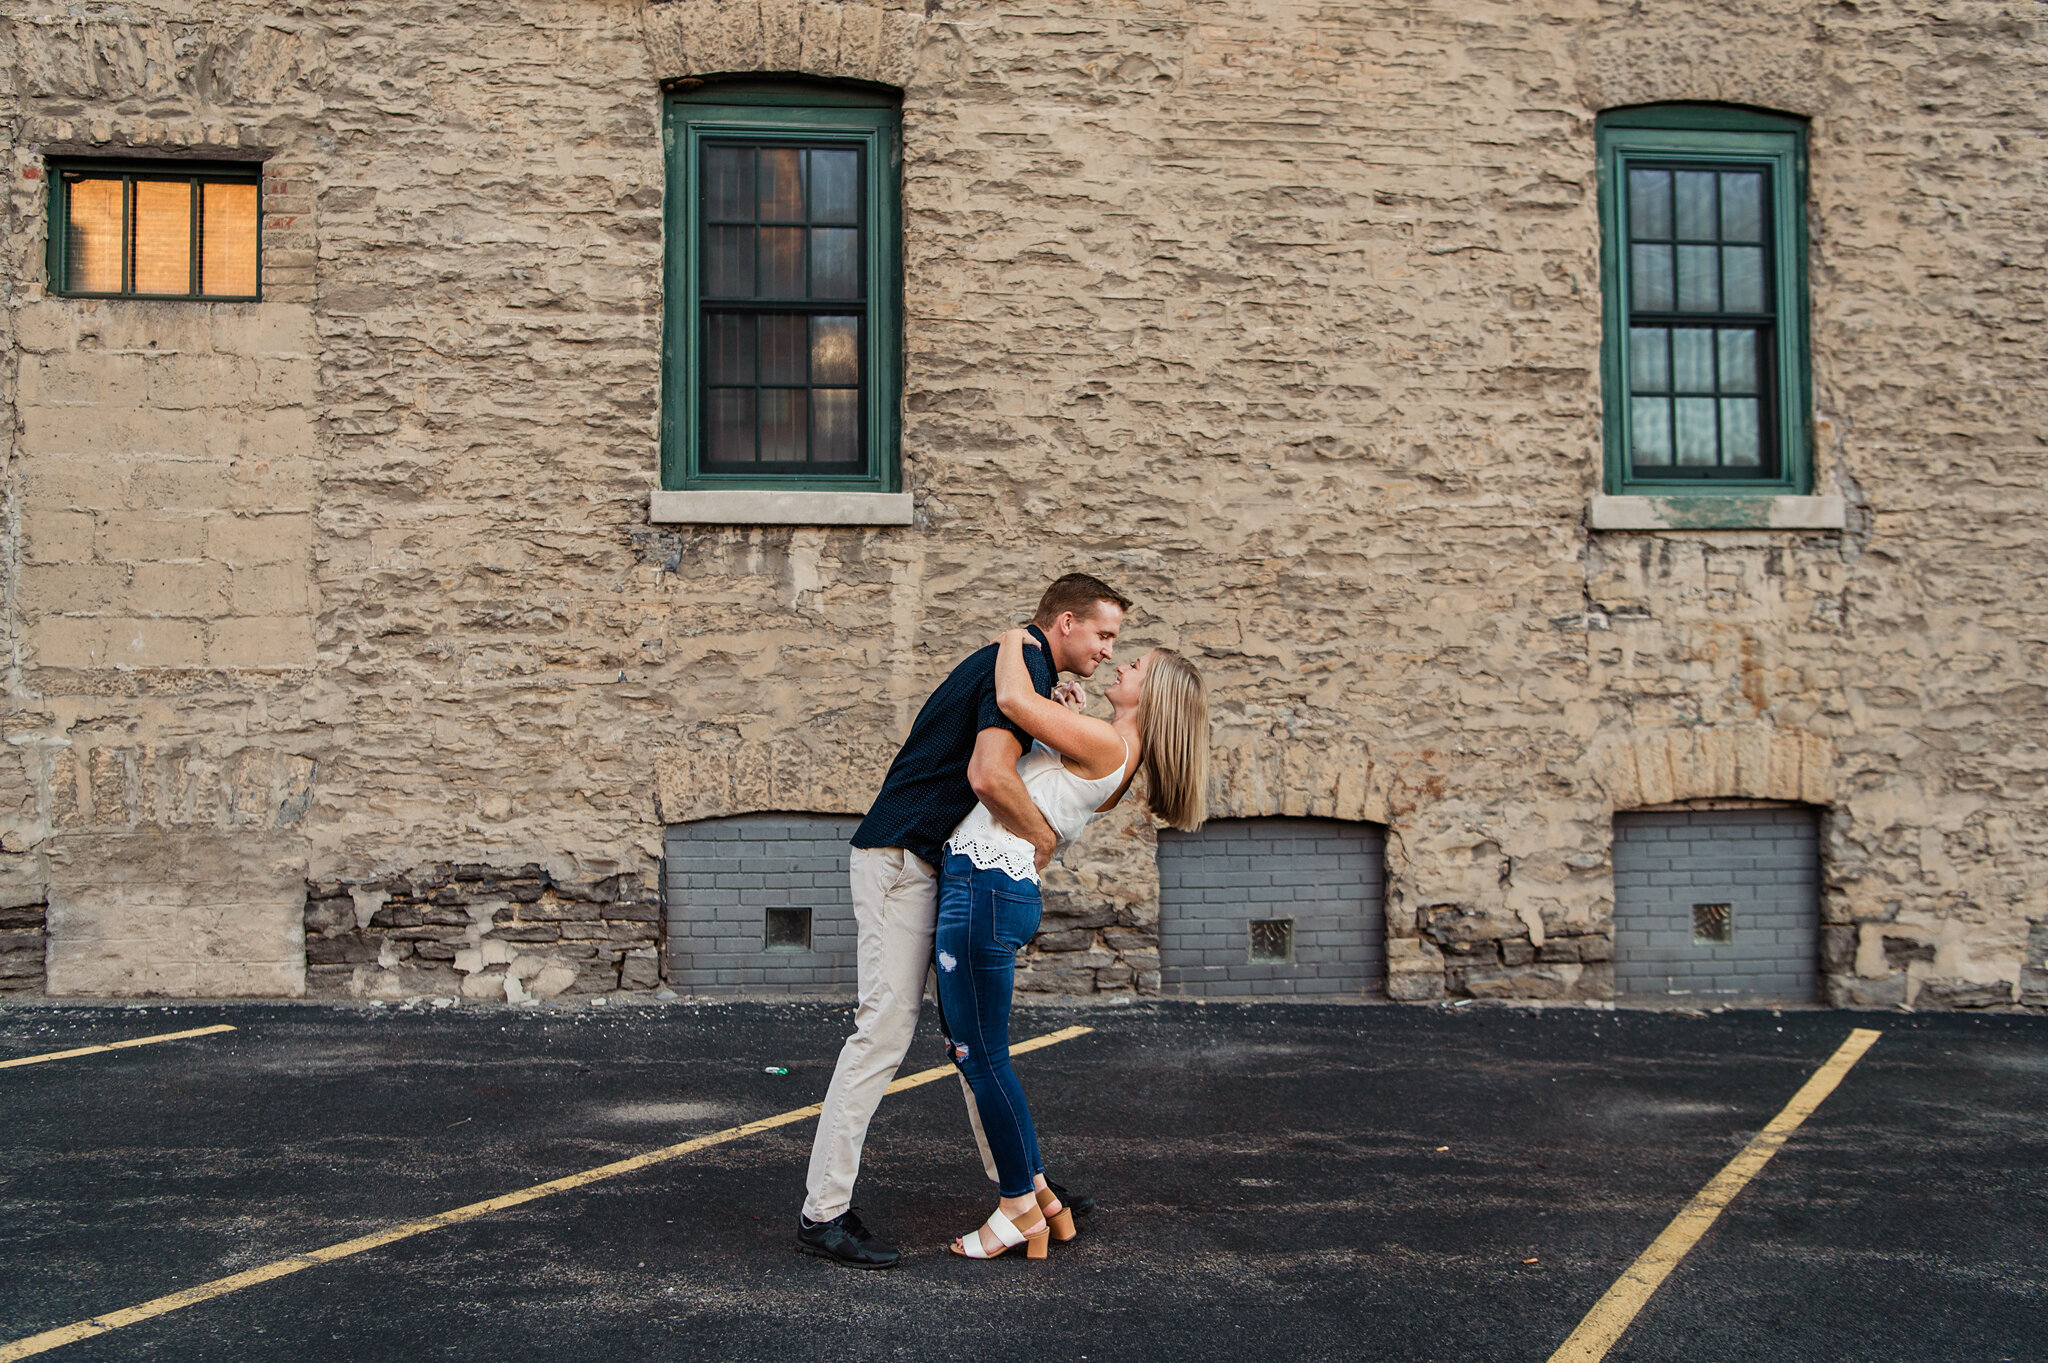 Genesee_Brew_House_High_Falls_Rochester_Engagement_Session_JILL_STUDIO_Rochester_NY_Photographer_5582.jpg